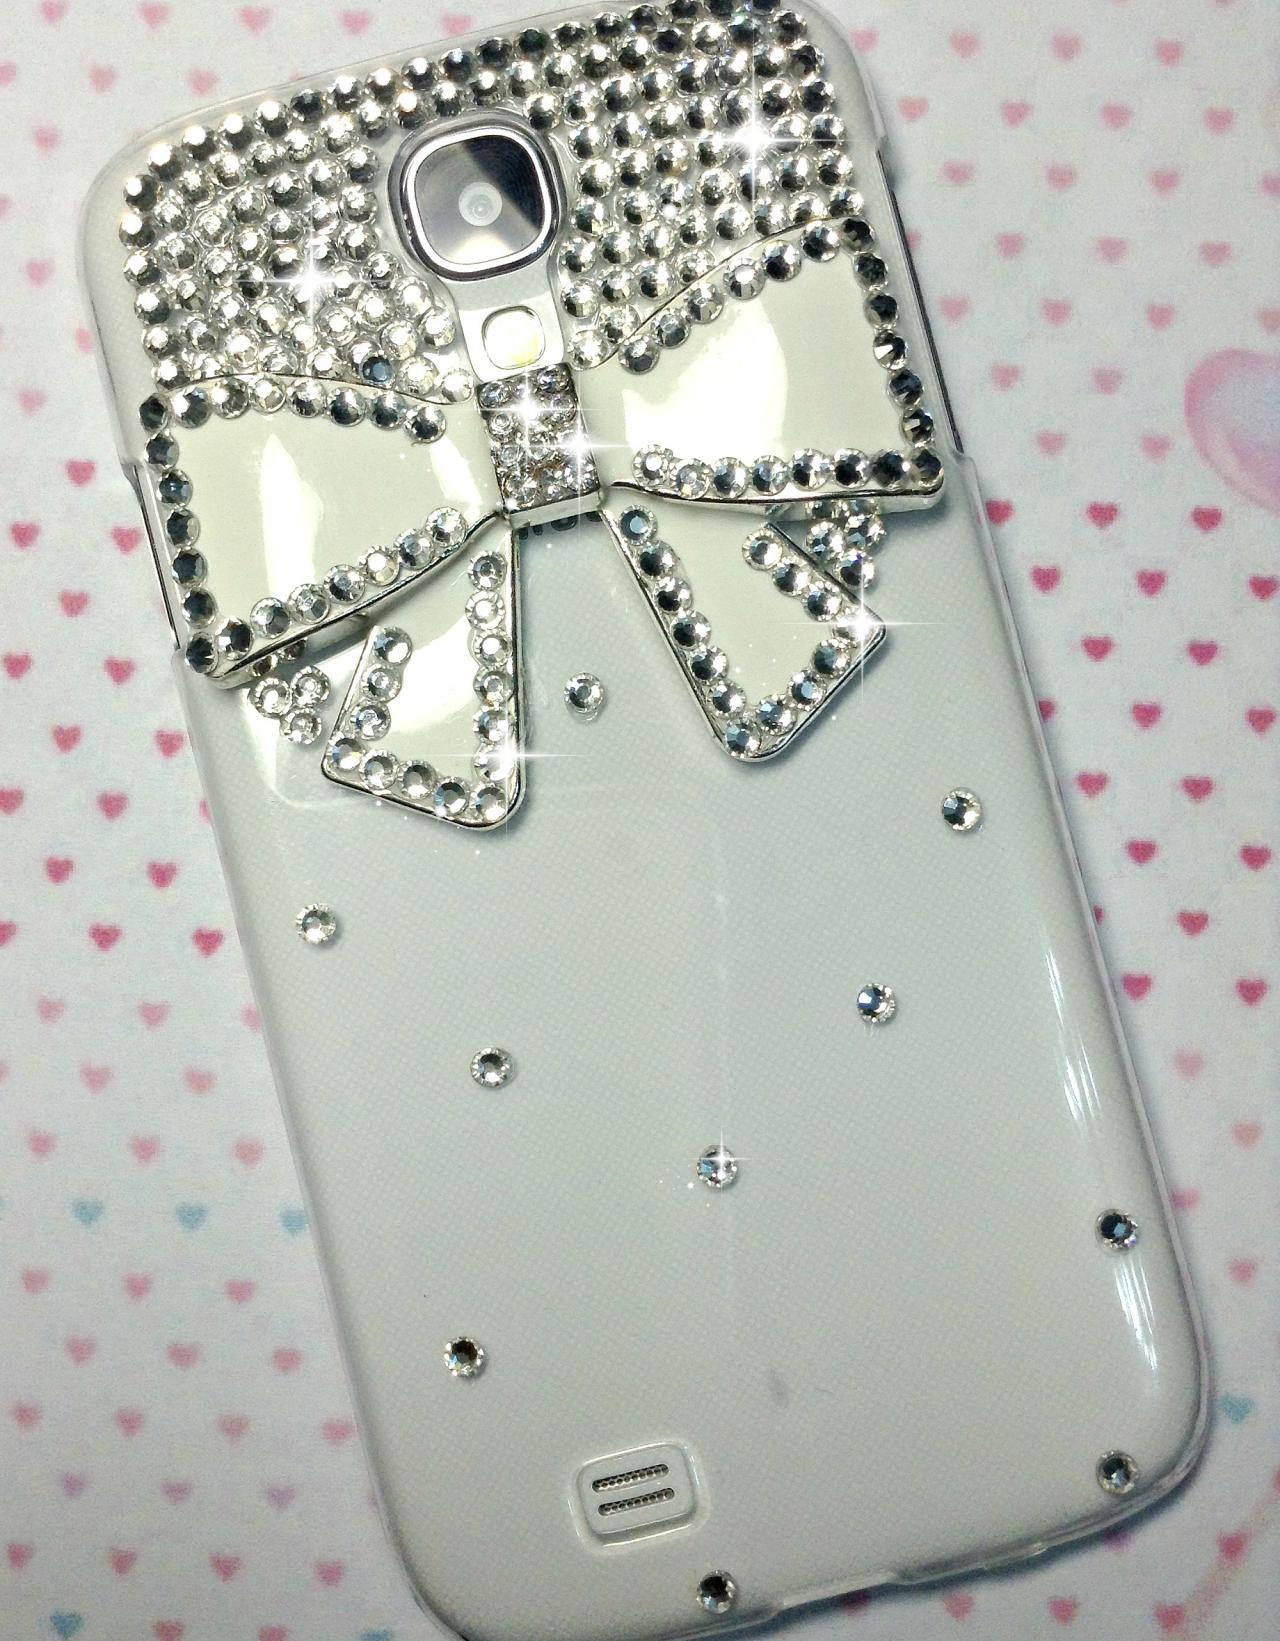 3d Handmade Bow Crystal Design Case Cover For Samsung Galaxy S 4 S4 Iv Lte I9500 I9505